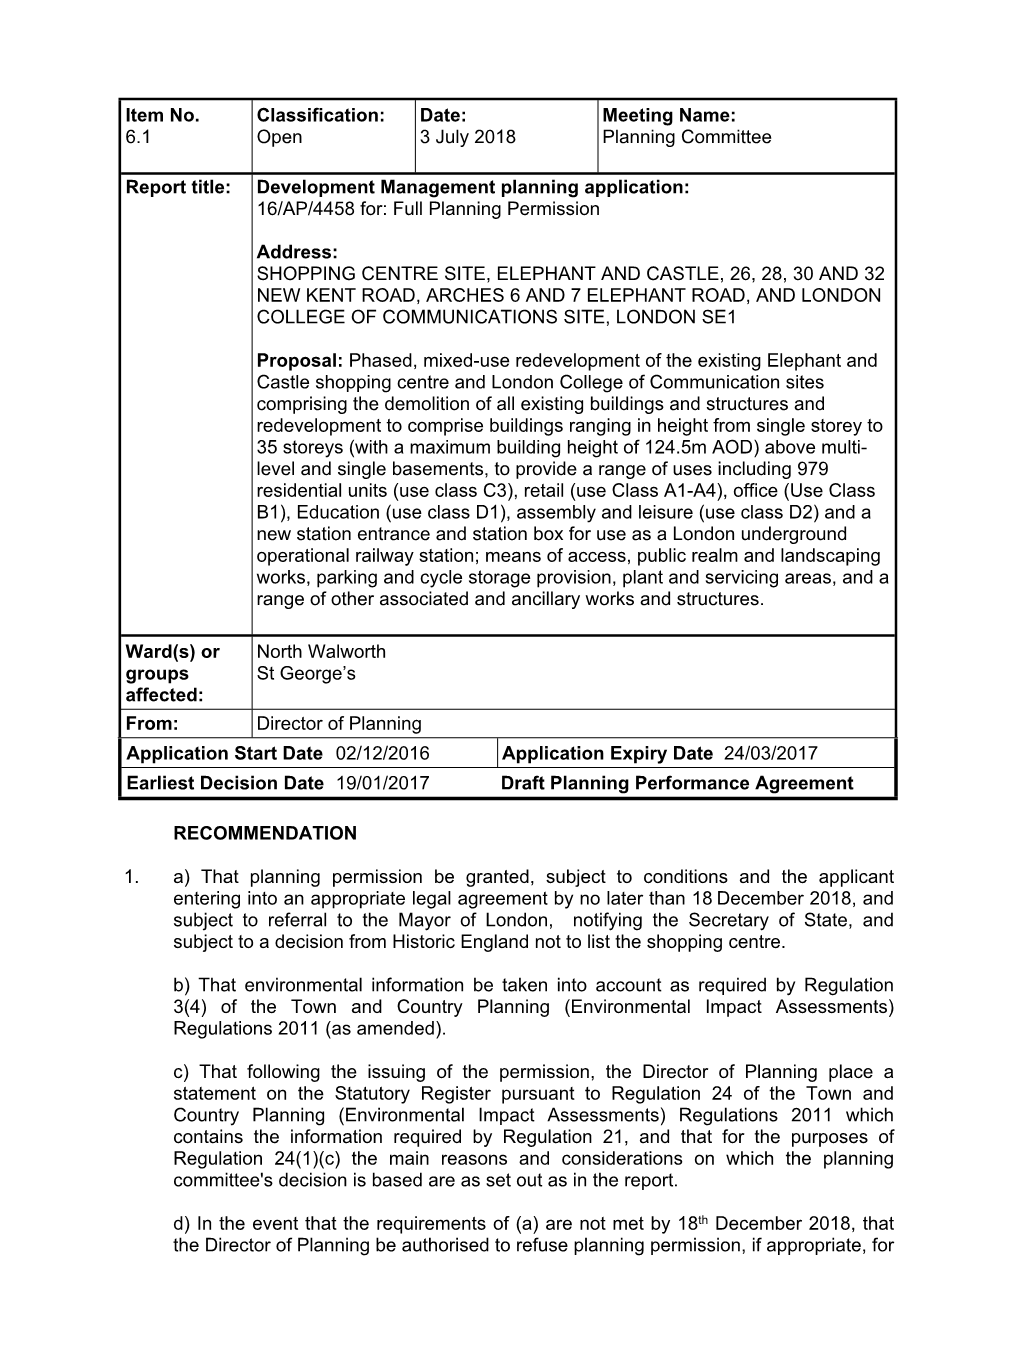 Planning Committee Report Title: Development Management Planni